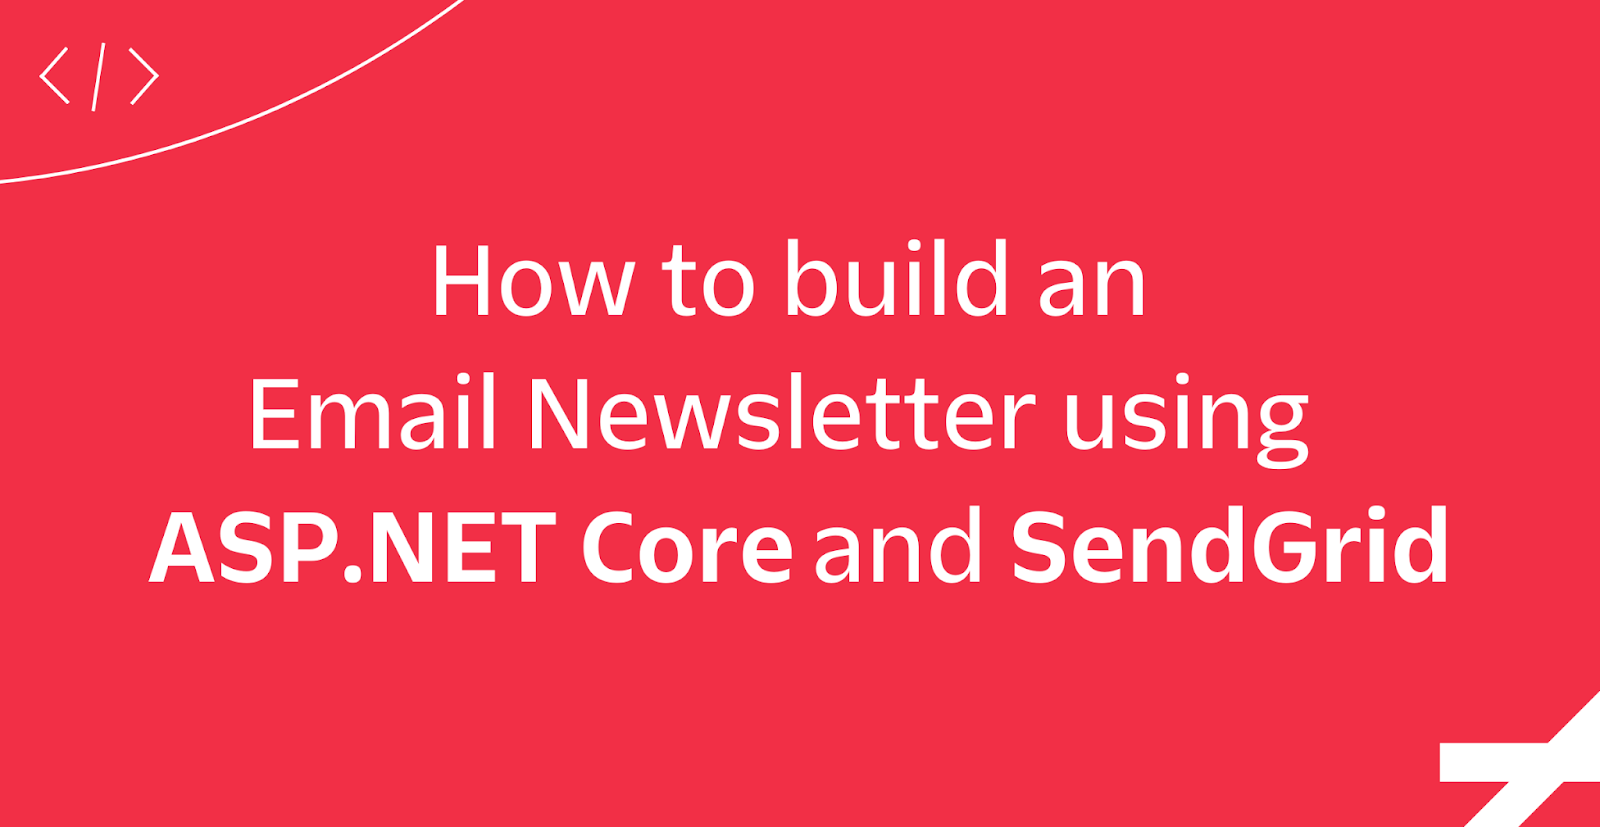 How to build an Email Newsletter using ASP.NET Core and SendGrid